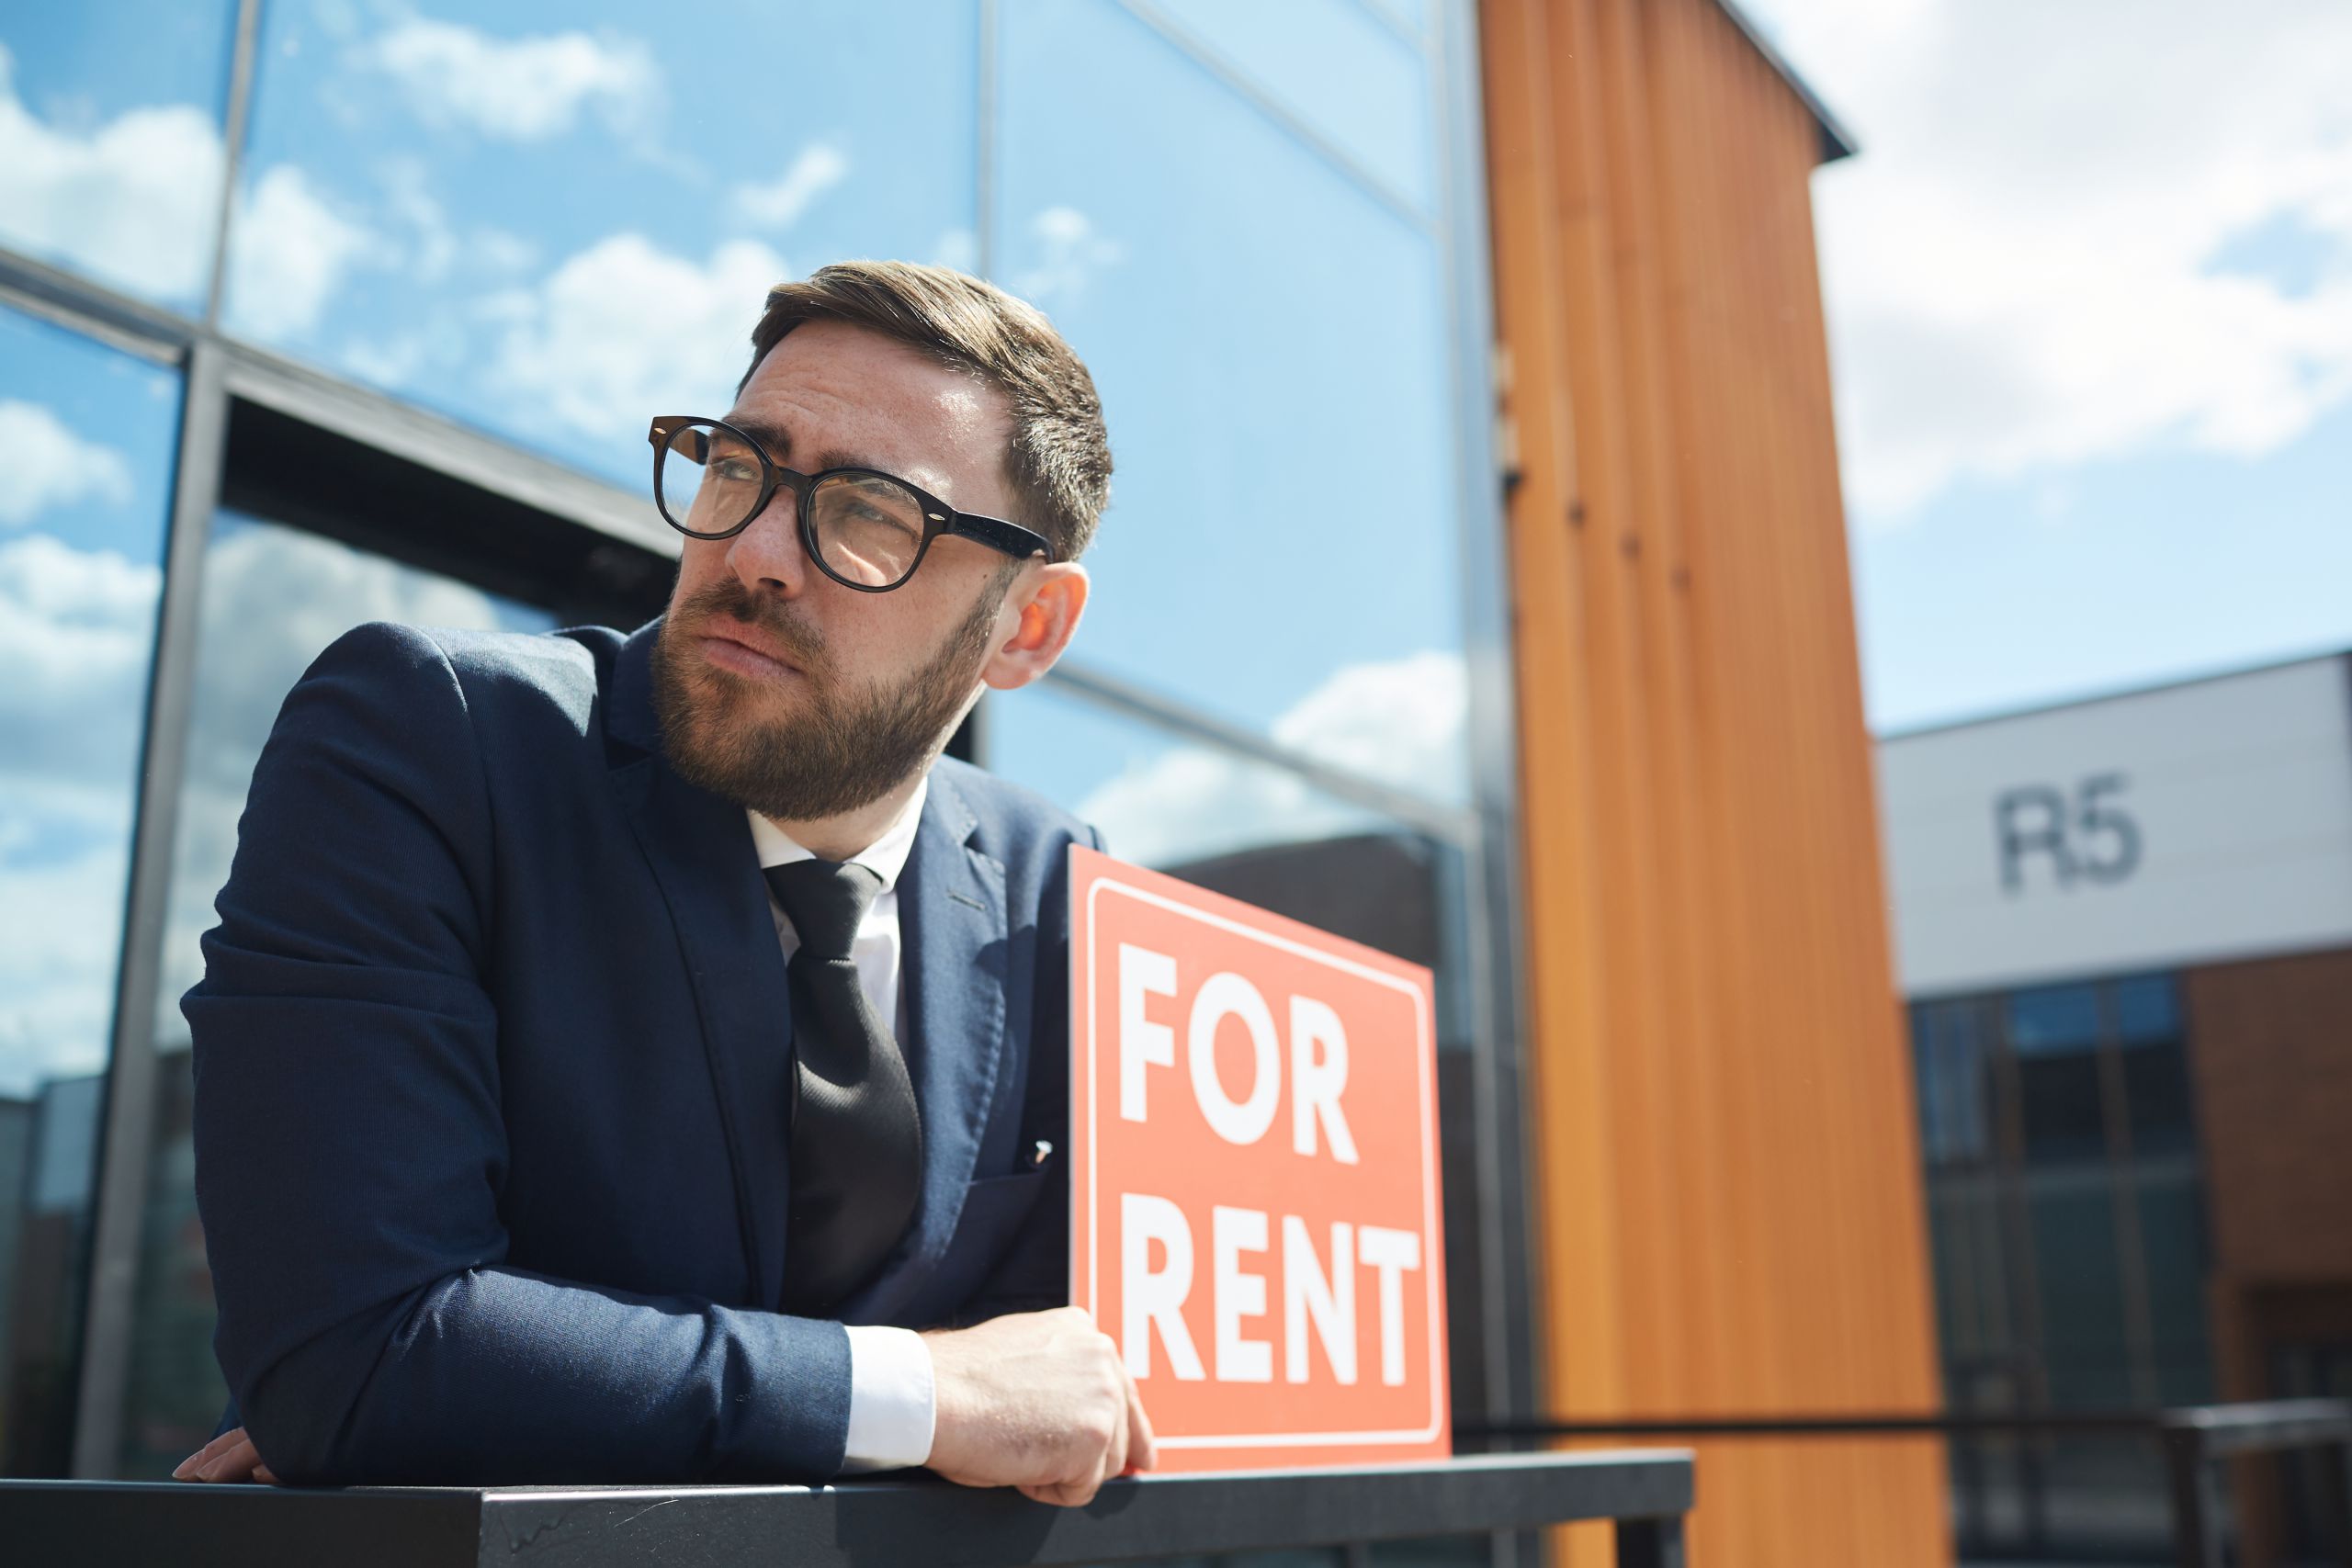 Man working as a real estate agent